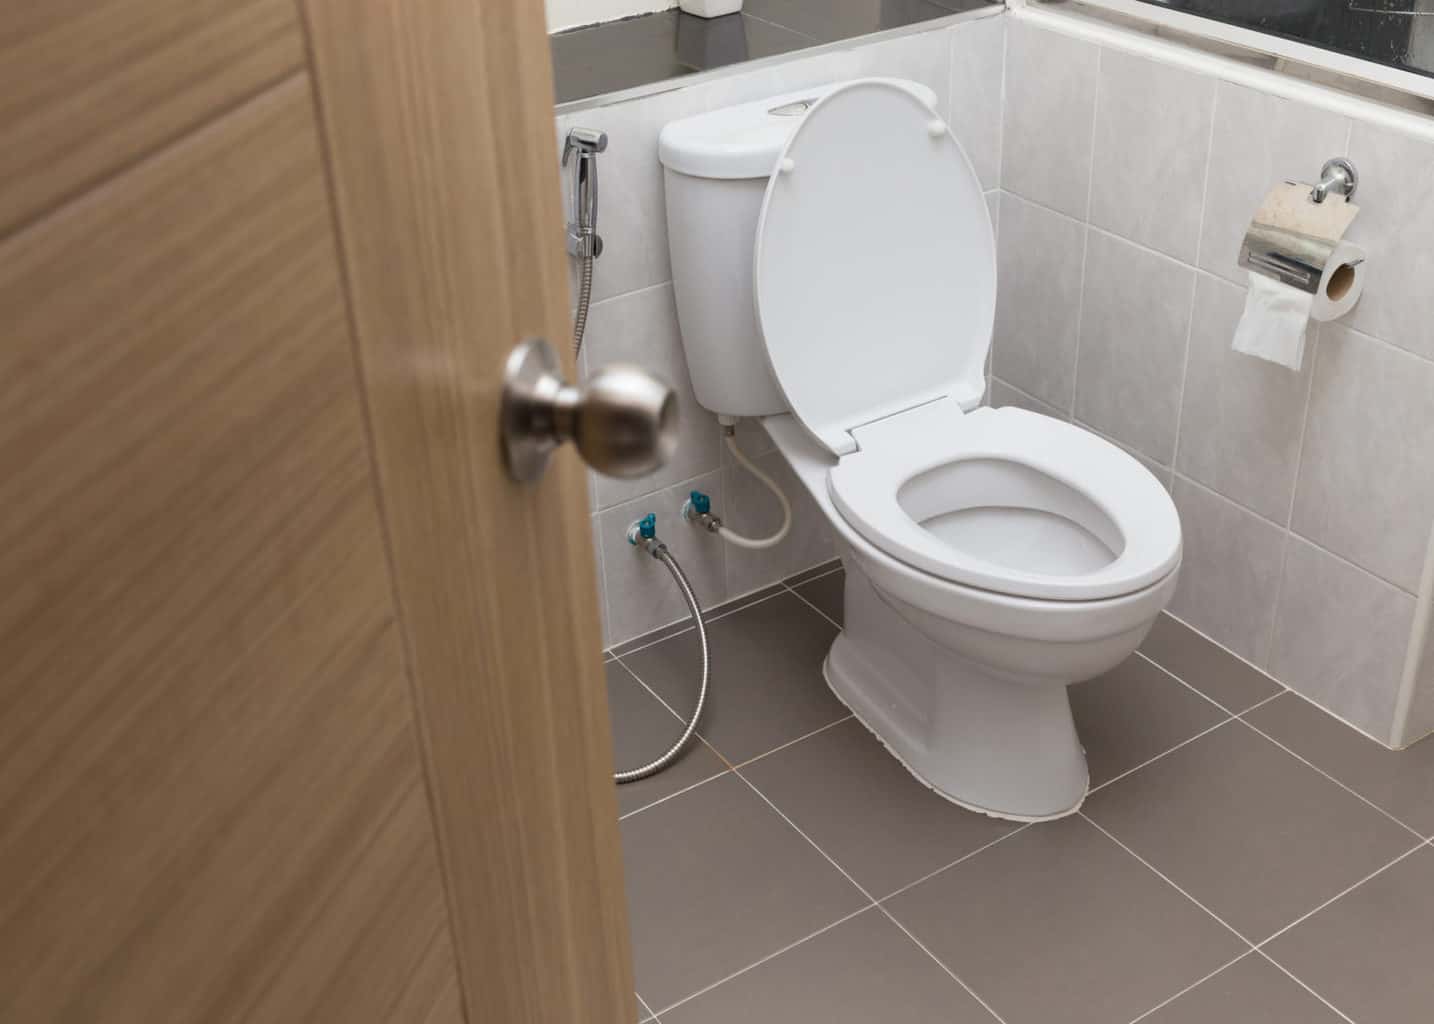 Best Flushing Toilet in 2022 [7 Reviews and Buying Guide]